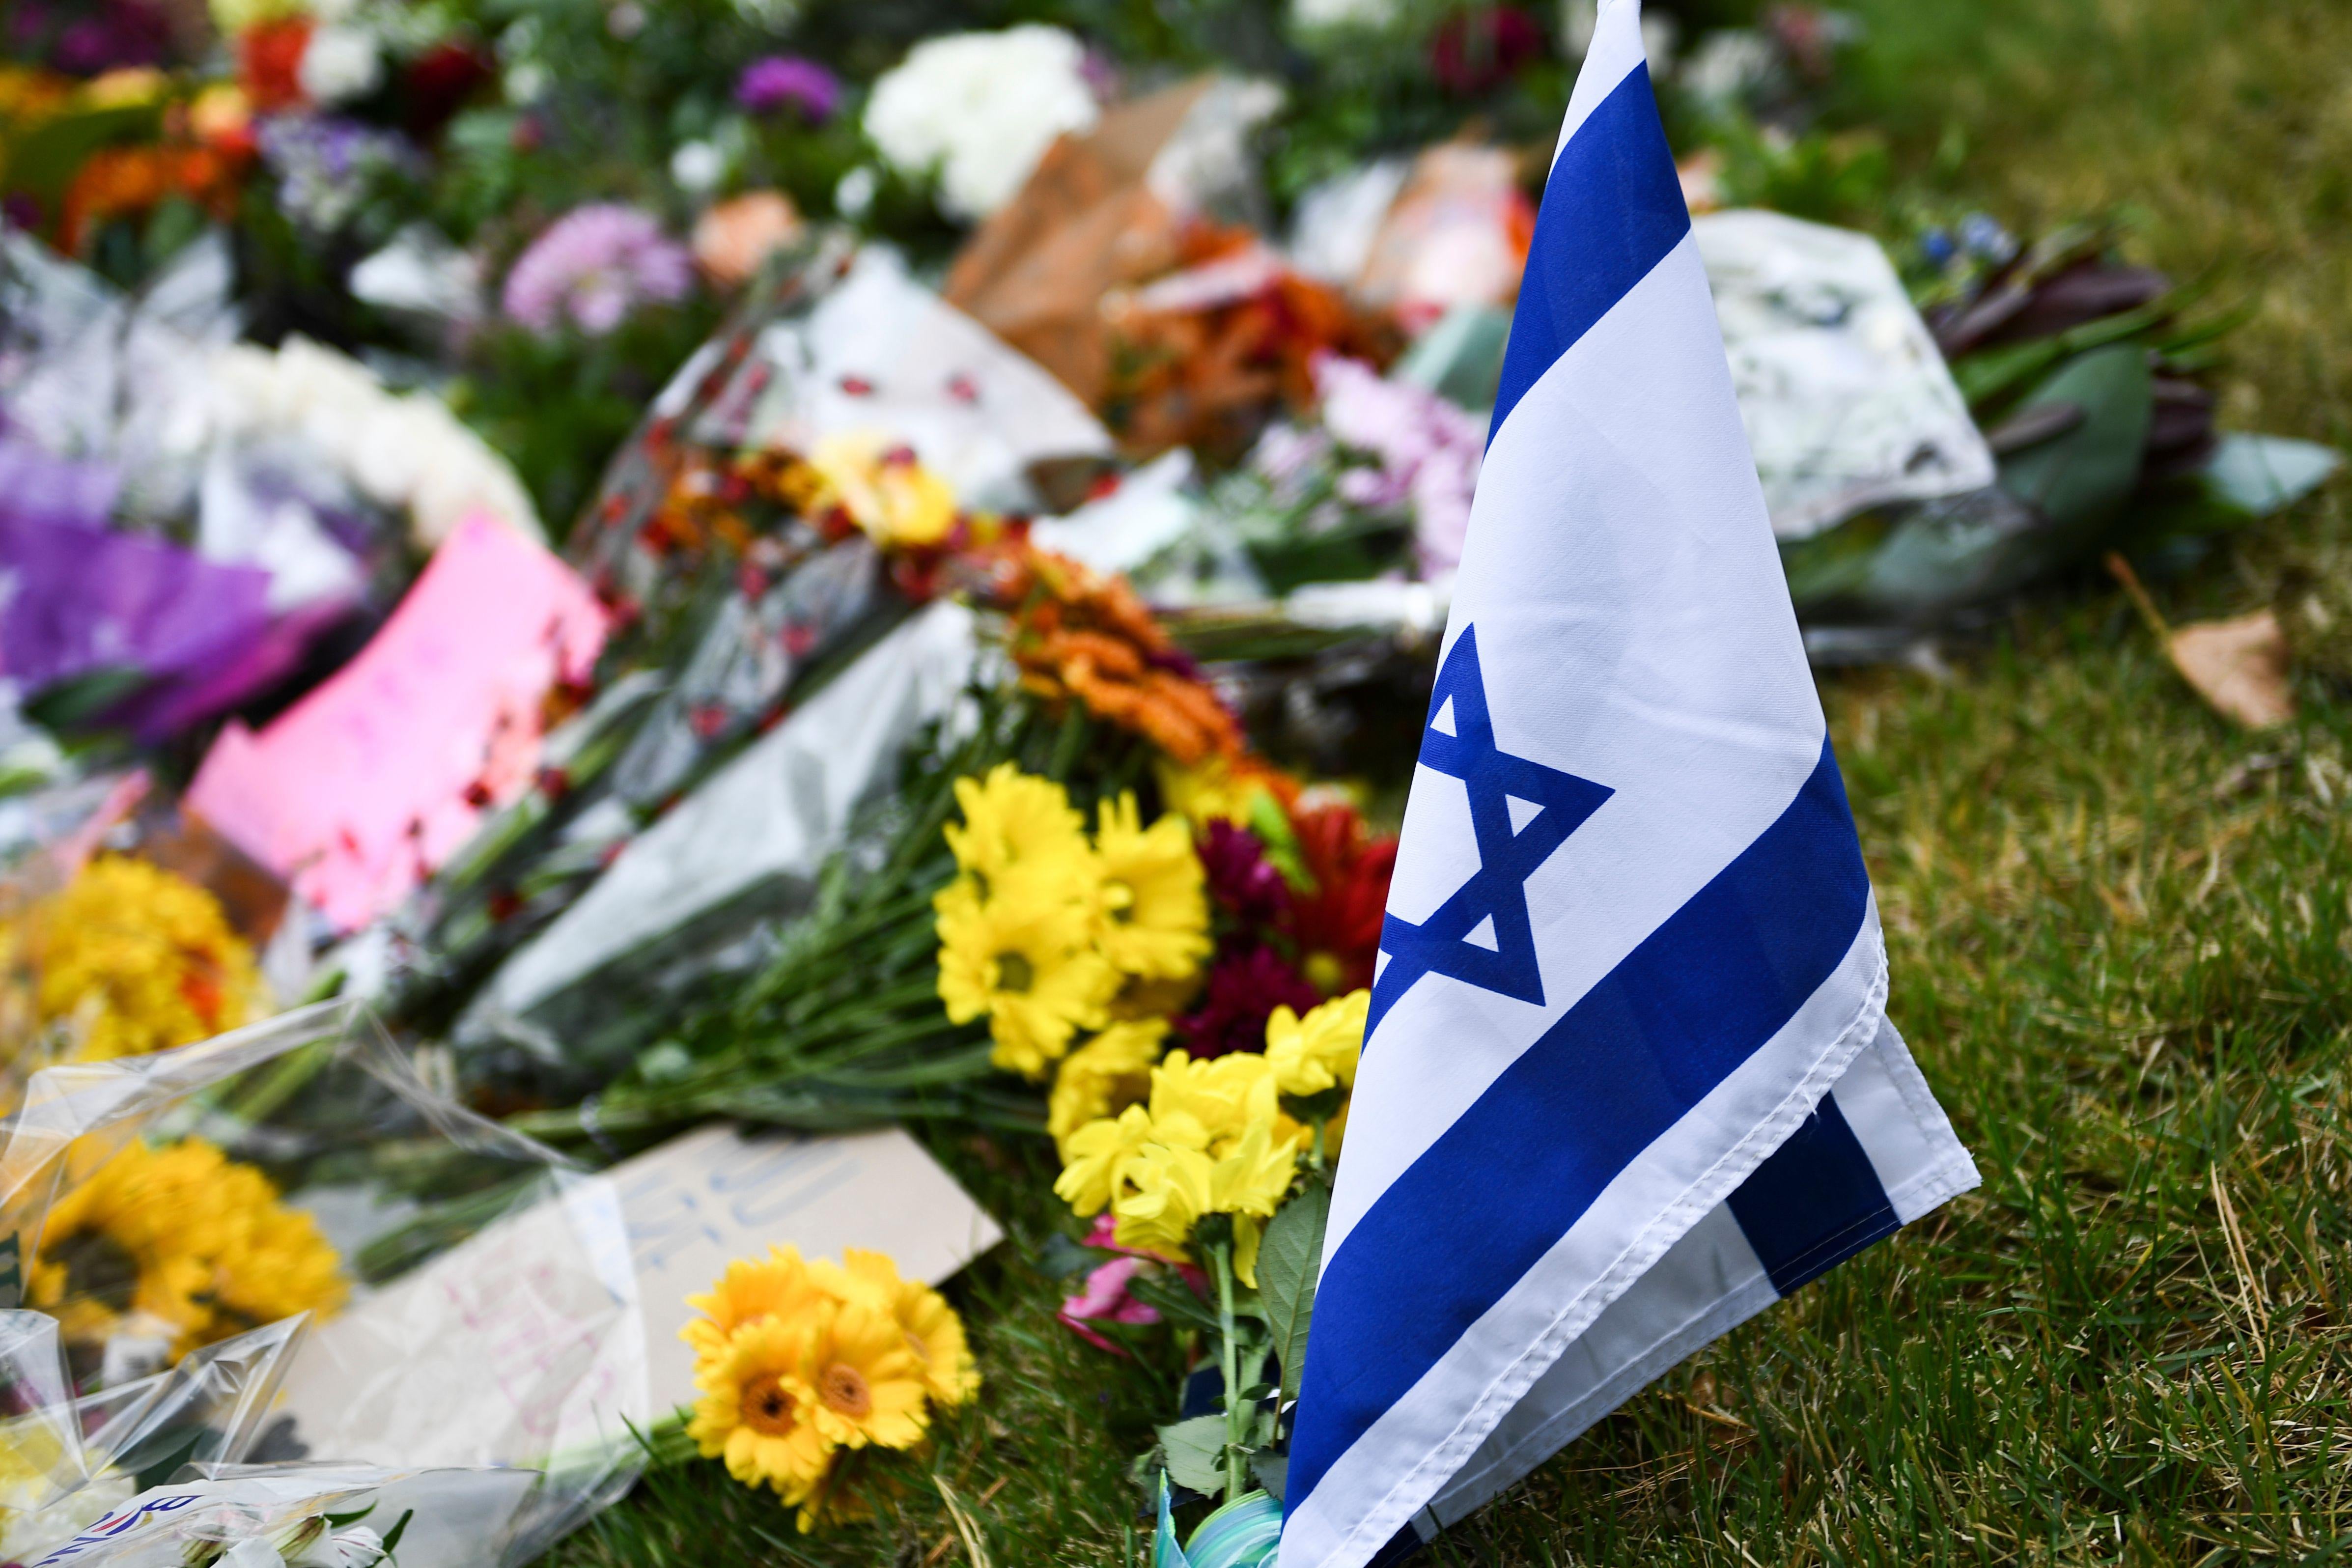 An Israeli national flag is seen at a memorial down the road from the Tree of Life synagogue.